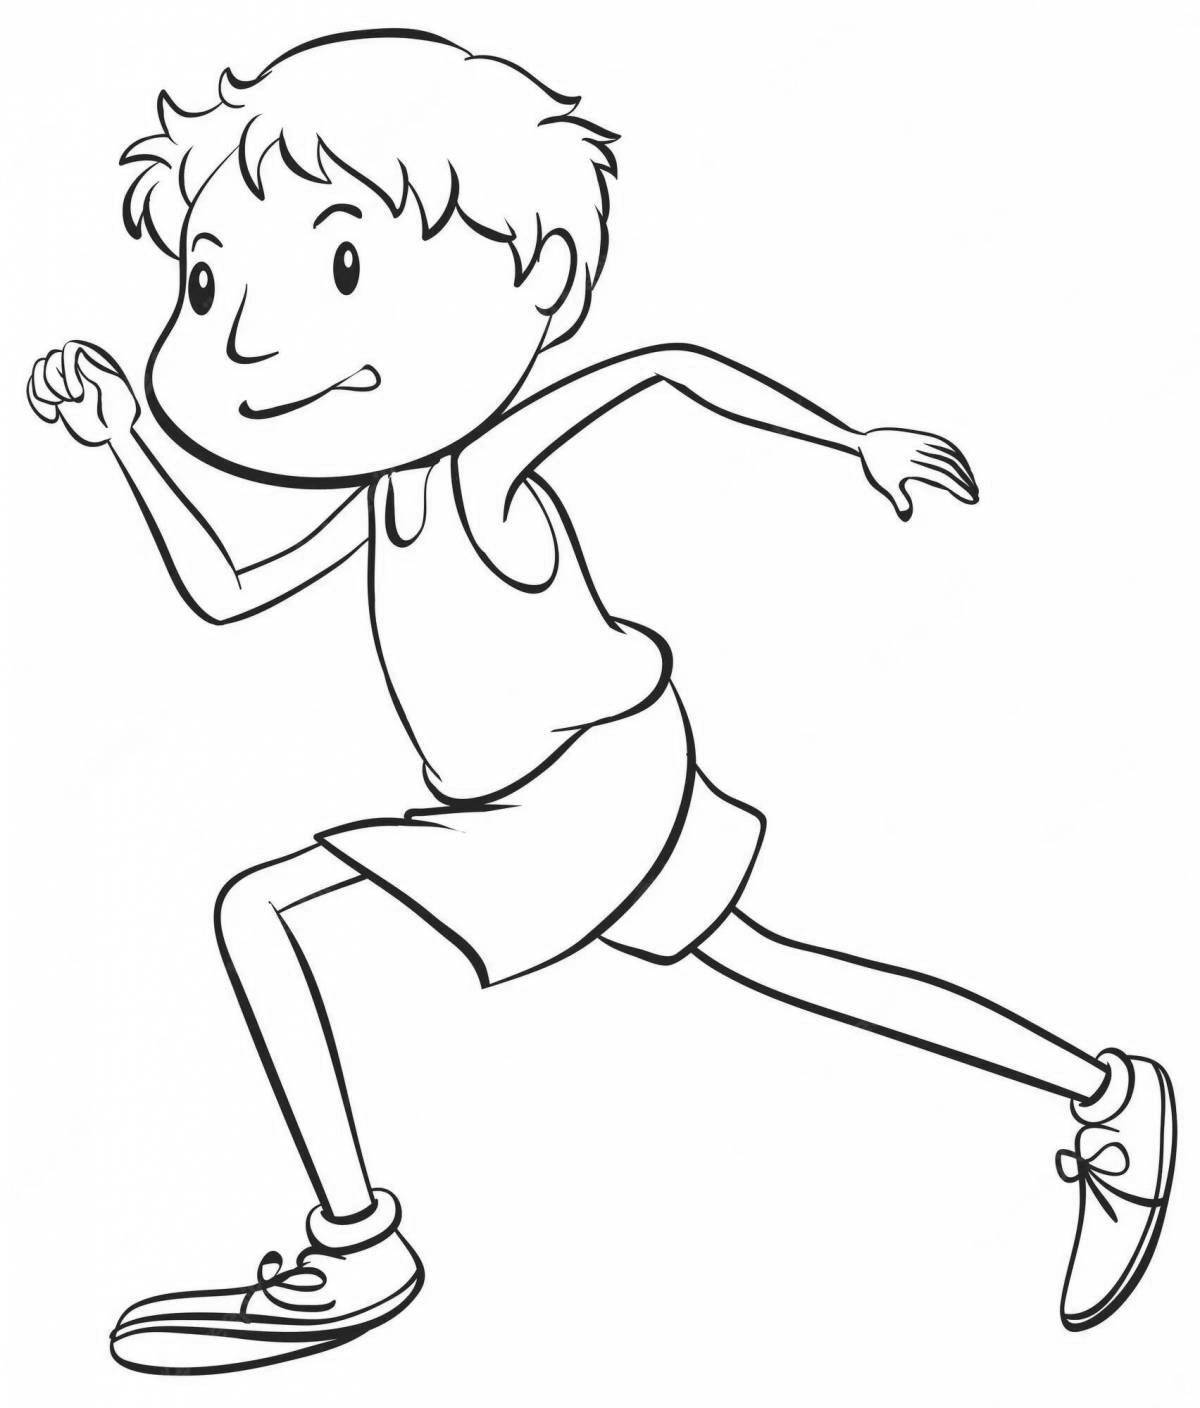 Animated boy running coloring page